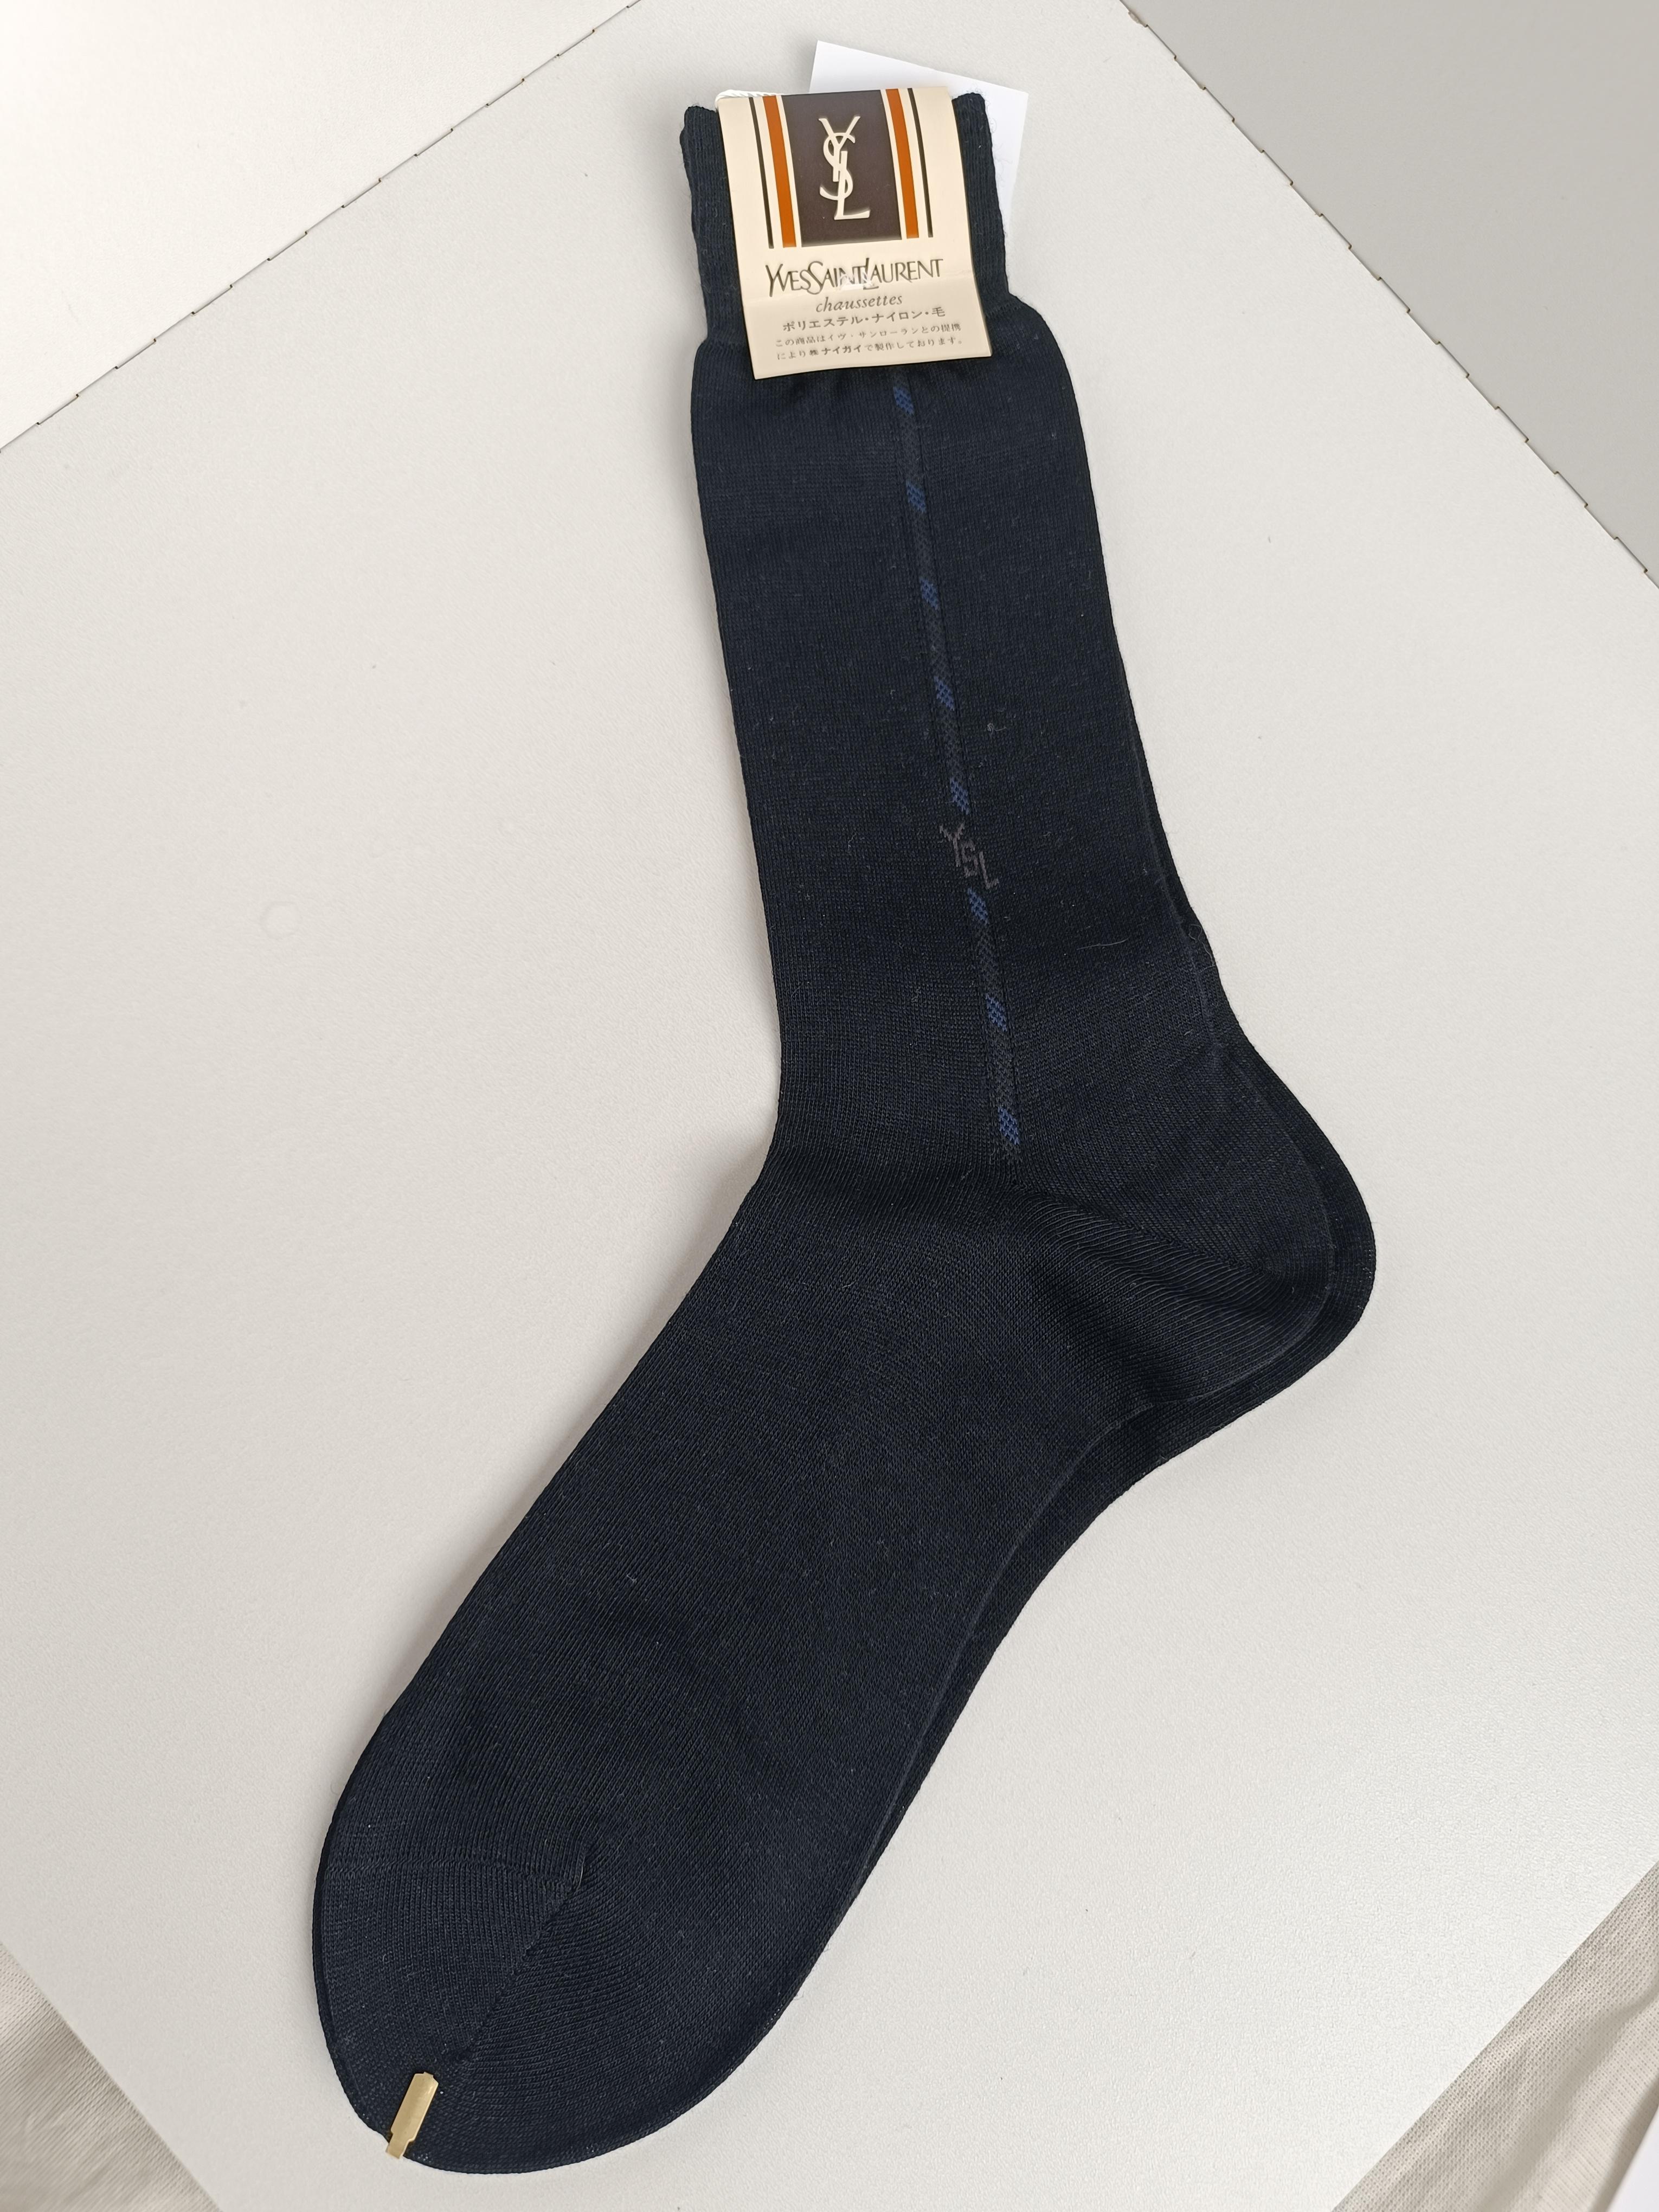 Authentic Yves Saint Laurent Vintage Men’s Socks
Country of manufacture: Japan
Color: Black
Unisex.
It's great to wear or give away!
We strive to ensure high quality control, and more significant flaws will be shown in the photos and/or mentioned in